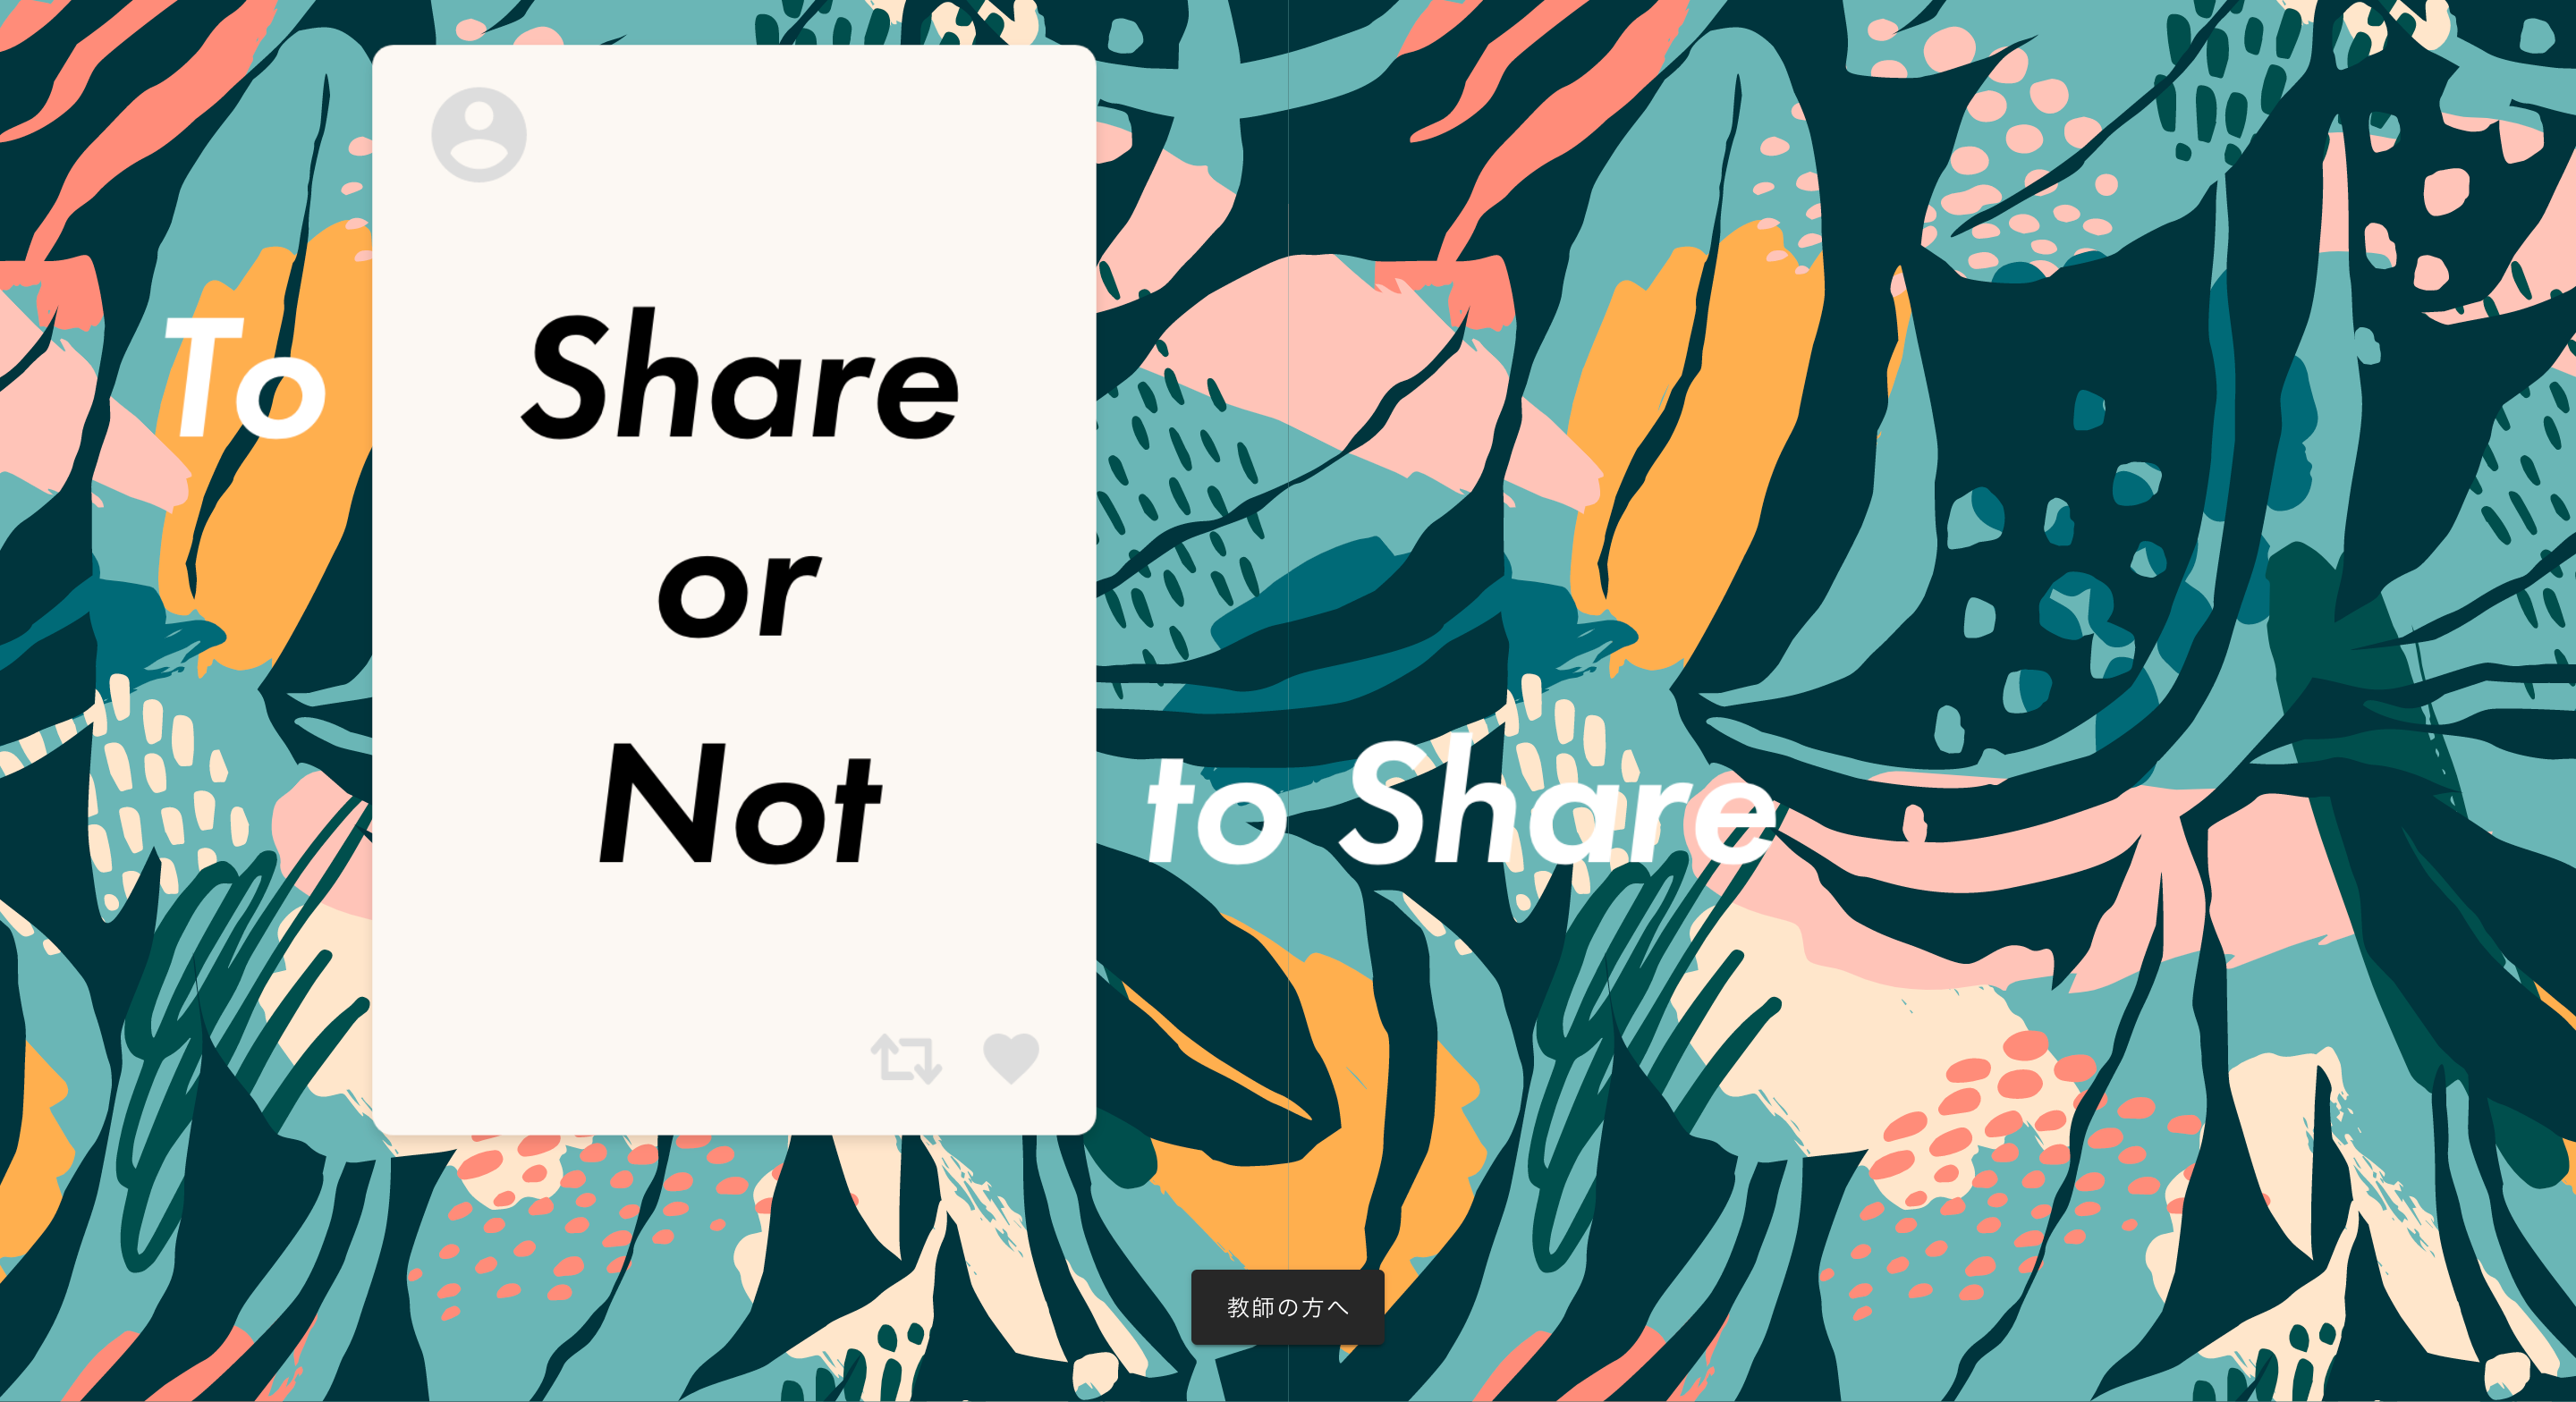 To Share or Not to Share